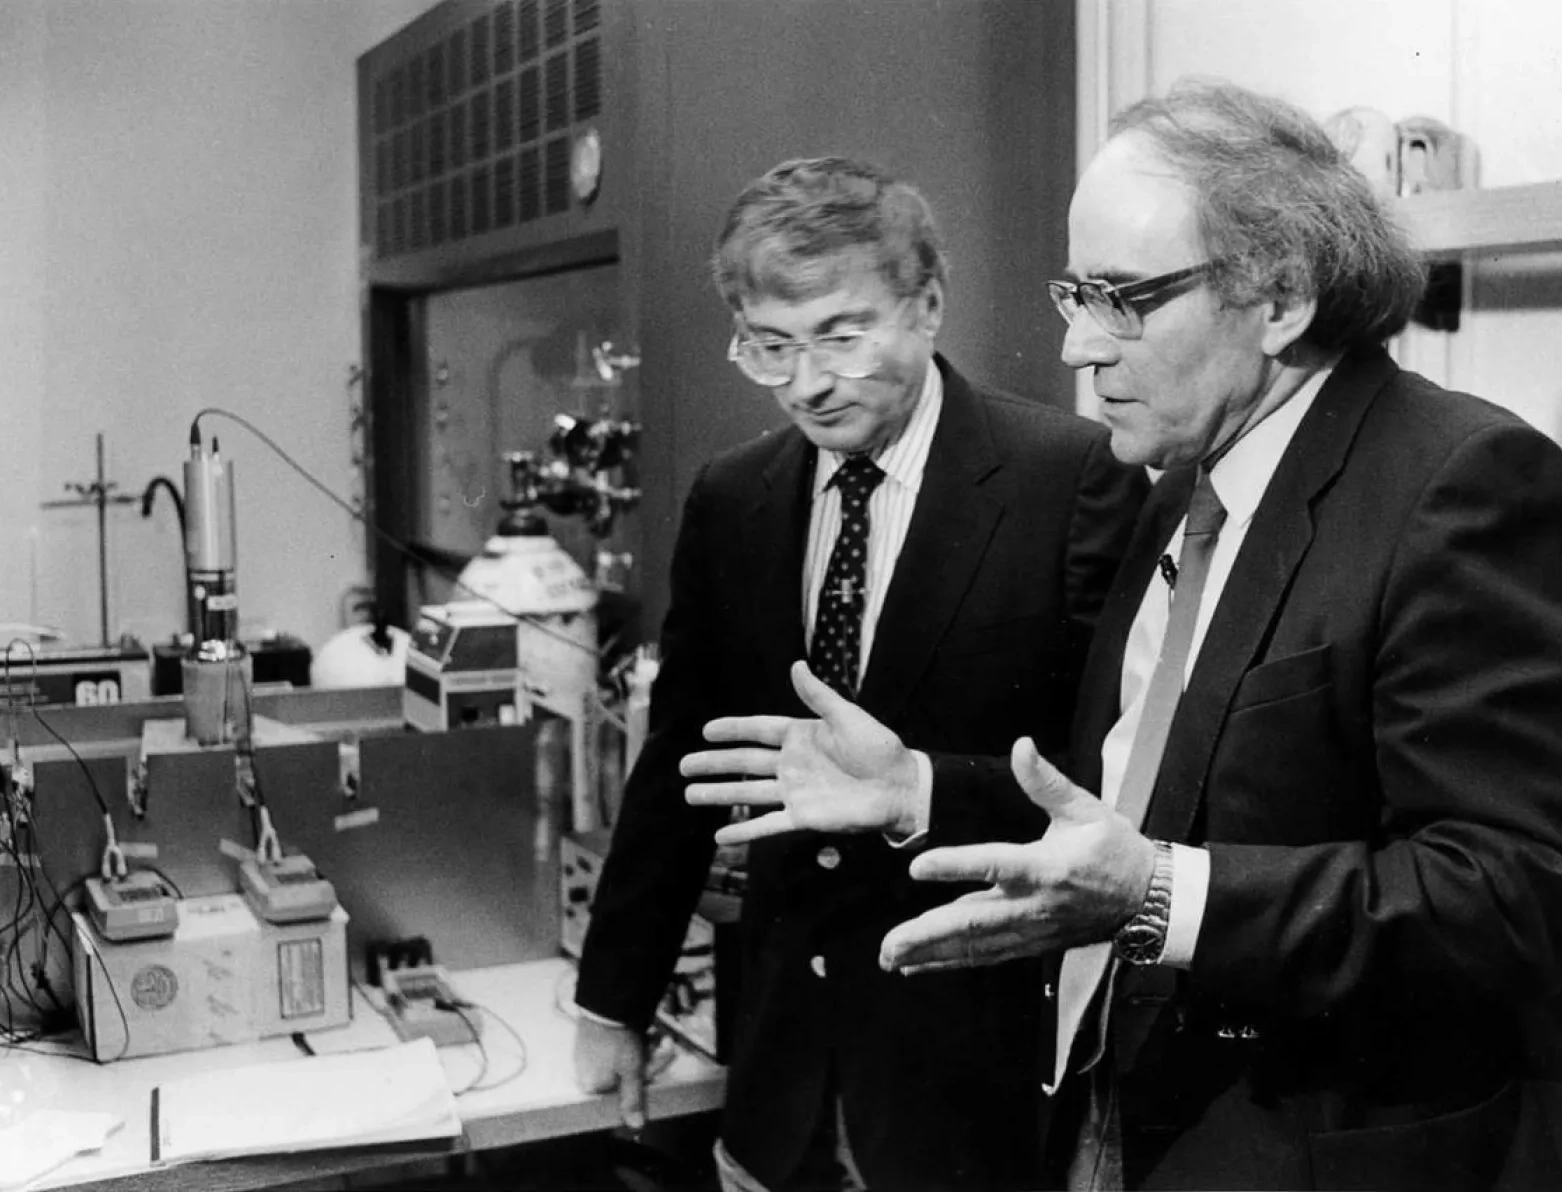 Two white men in suits talk near old fashioned chemistry equipment